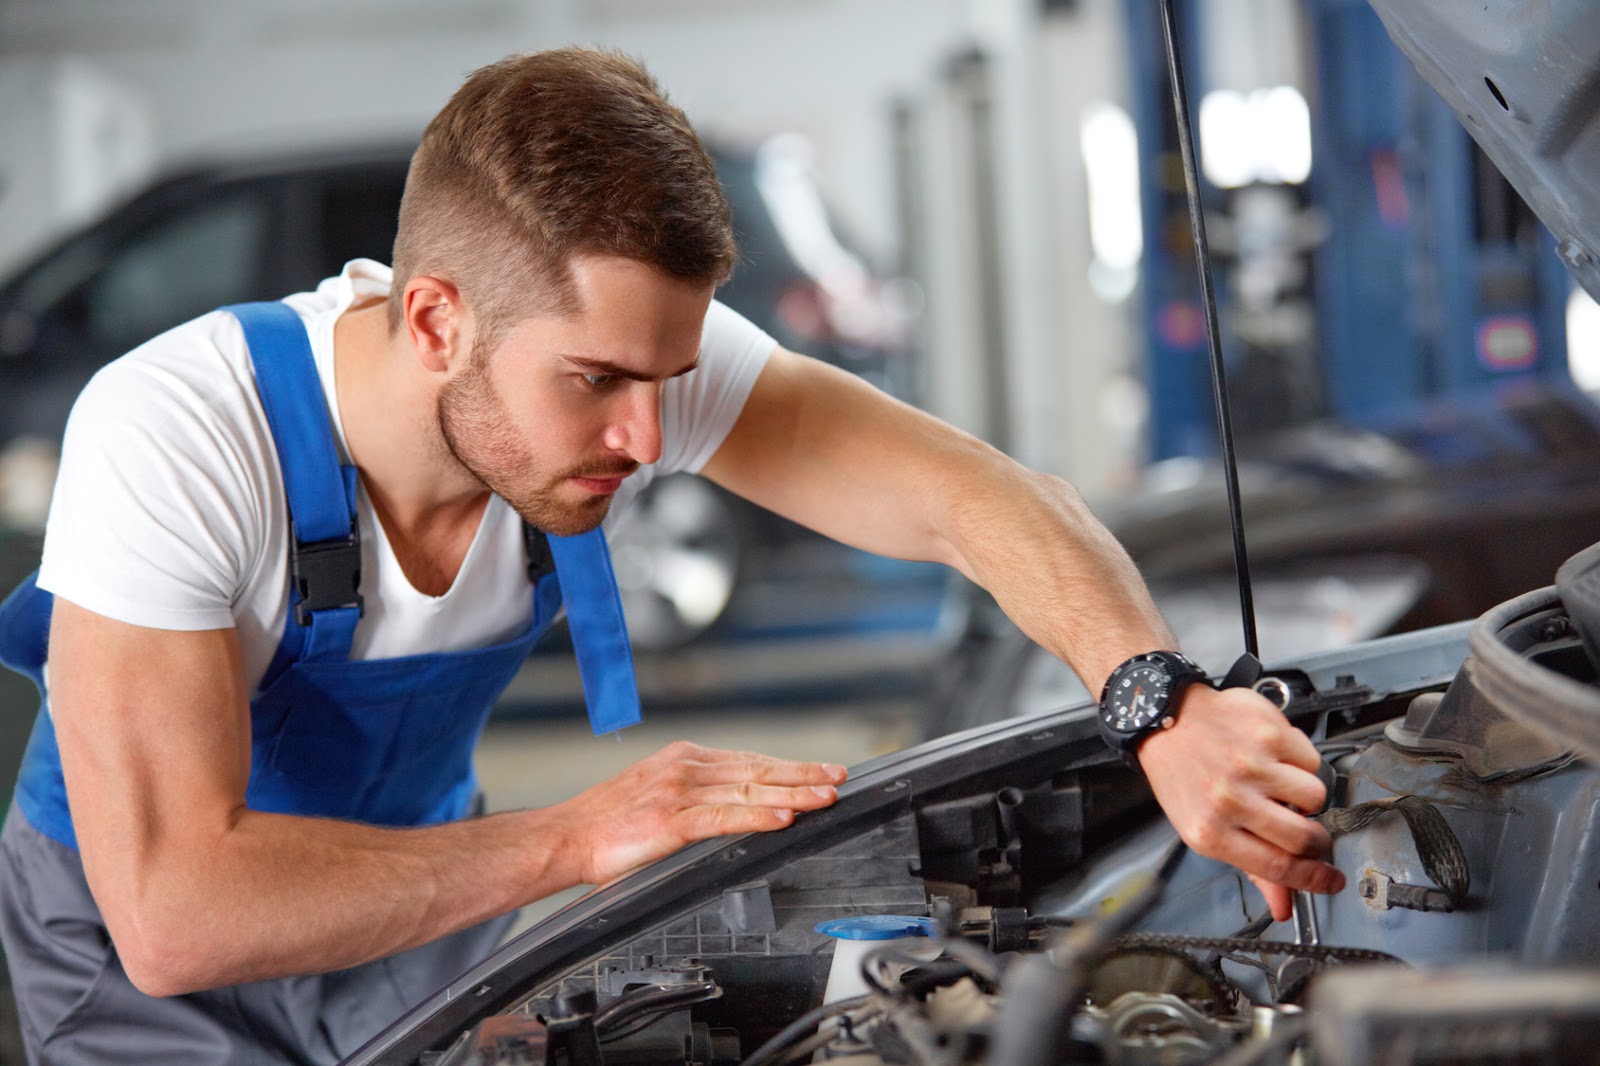 Read more about the article Car Repair – Things to Consider When Choosing a Car Repair Service